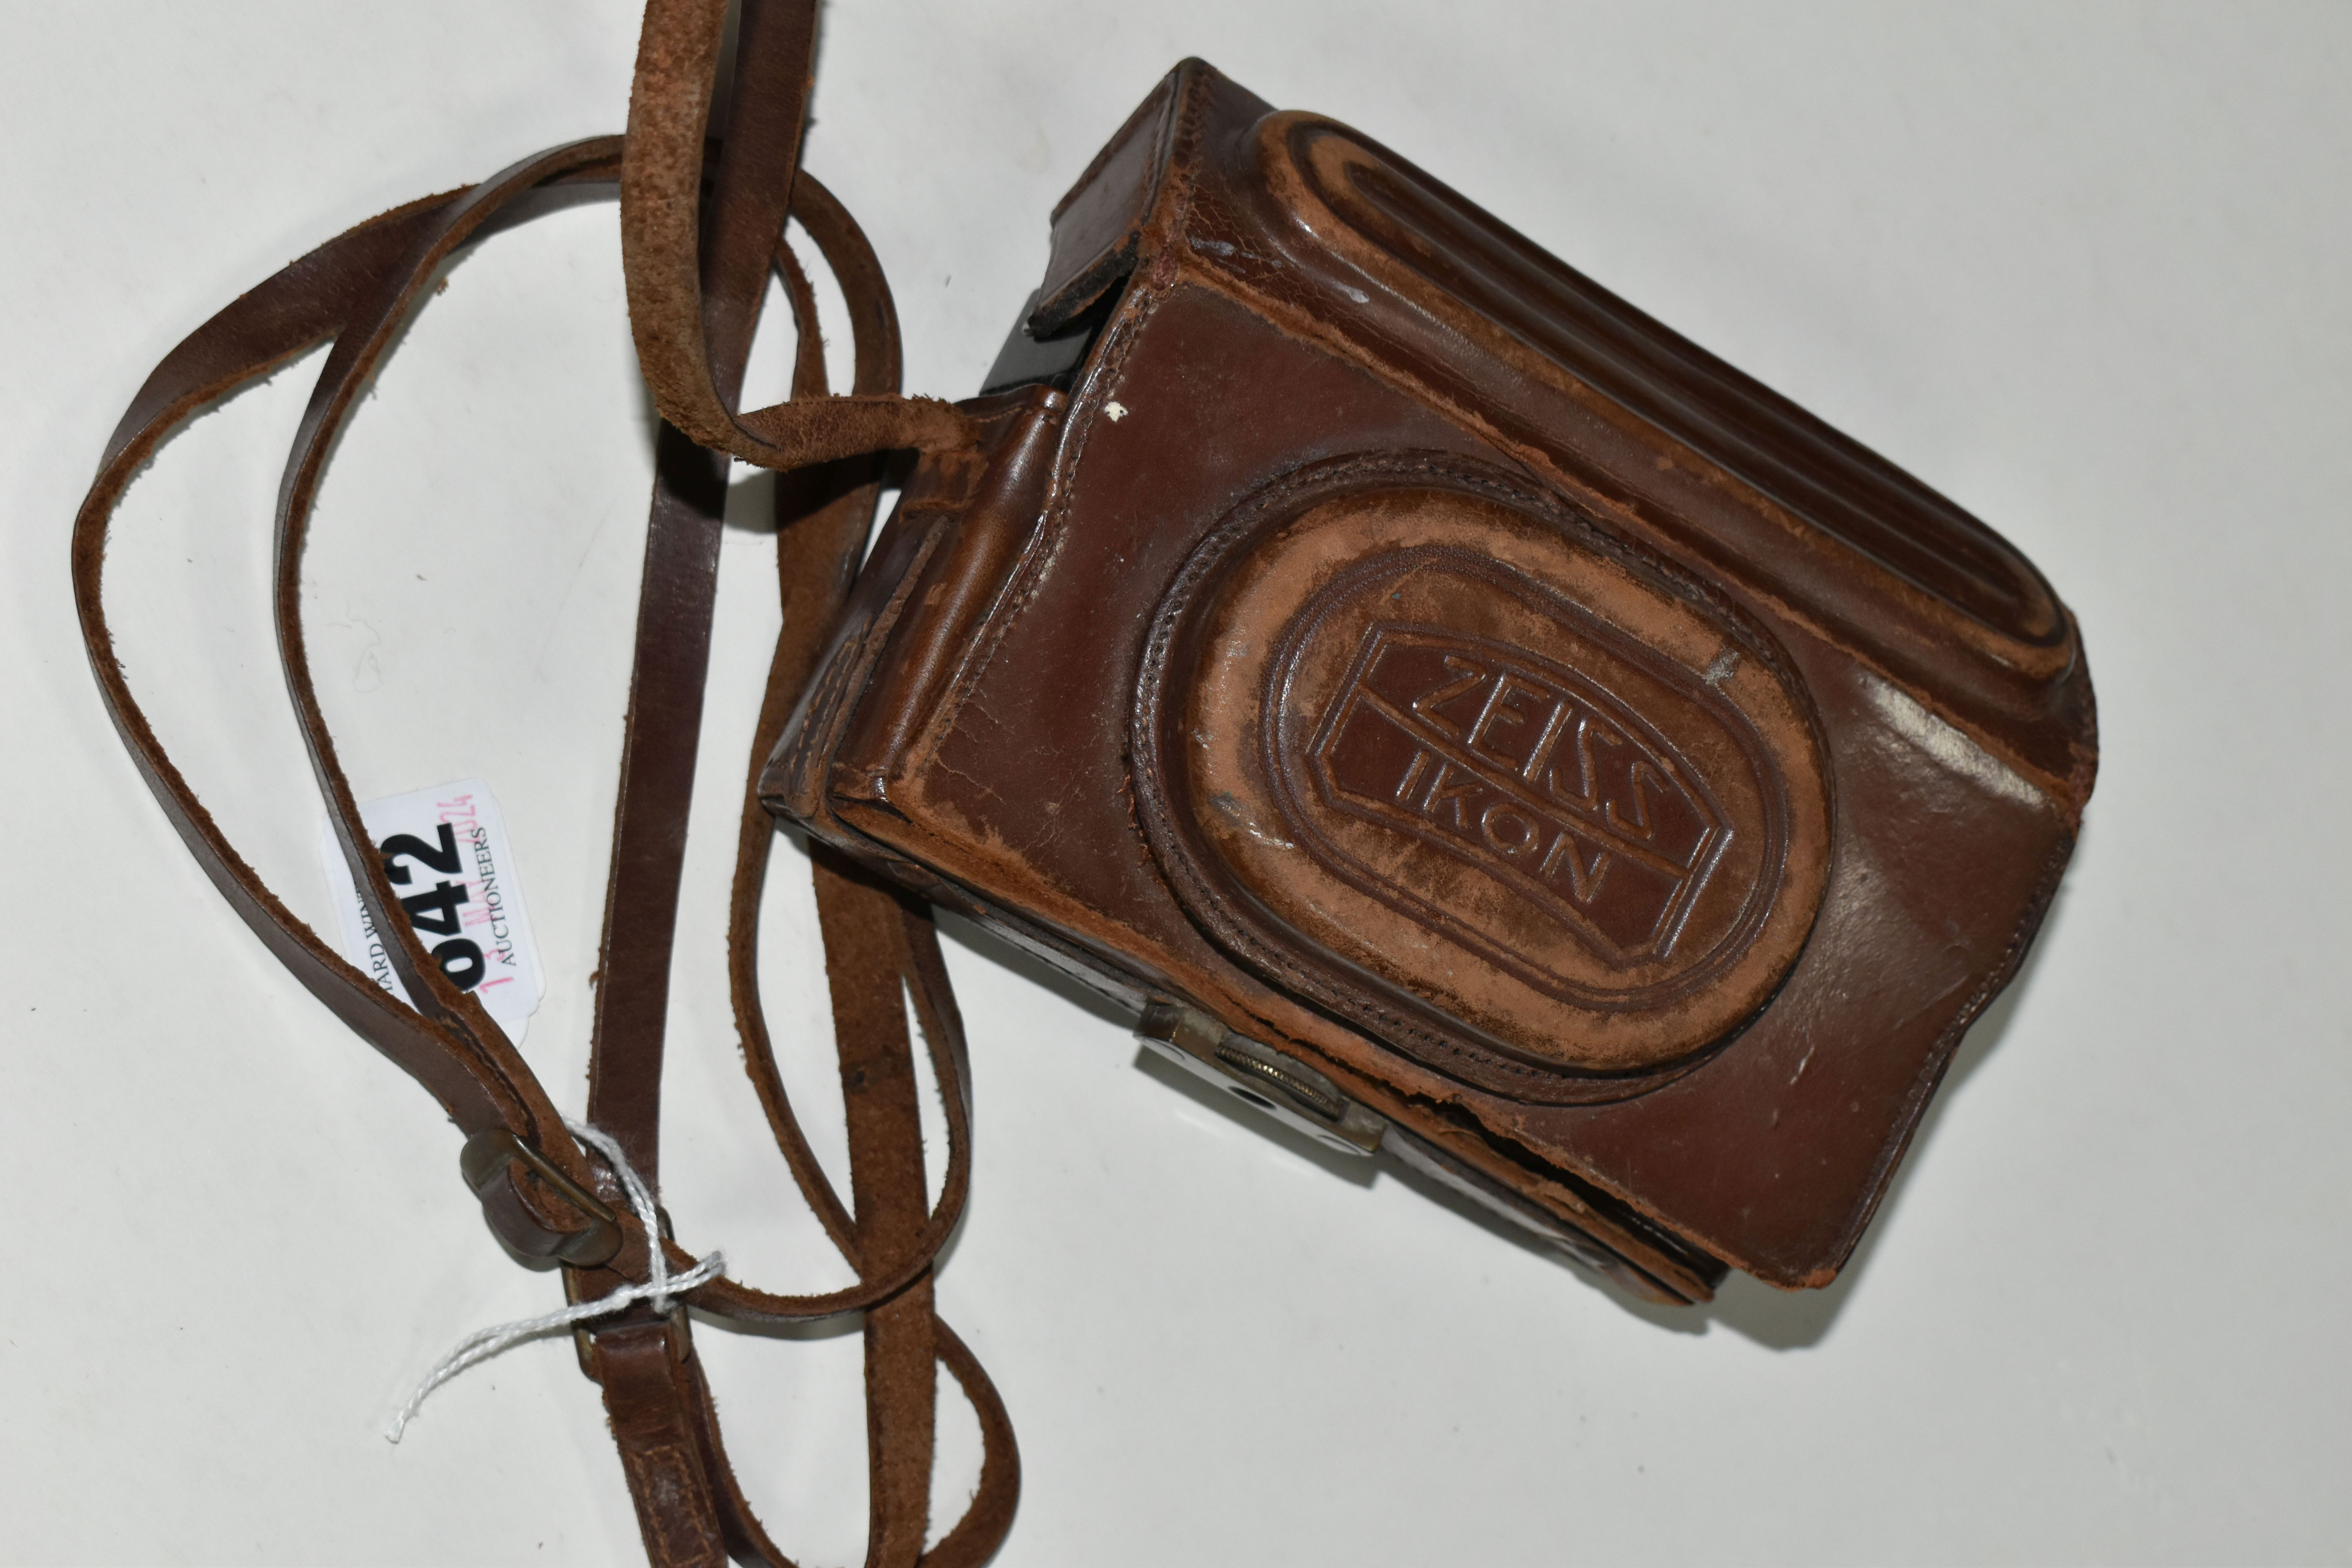 A ZEISS IKON CONTAX 1 FILM CAMERA, together with a Zeiss Ikon Jena 5cm f3.5 lens and leather case, - Image 4 of 5